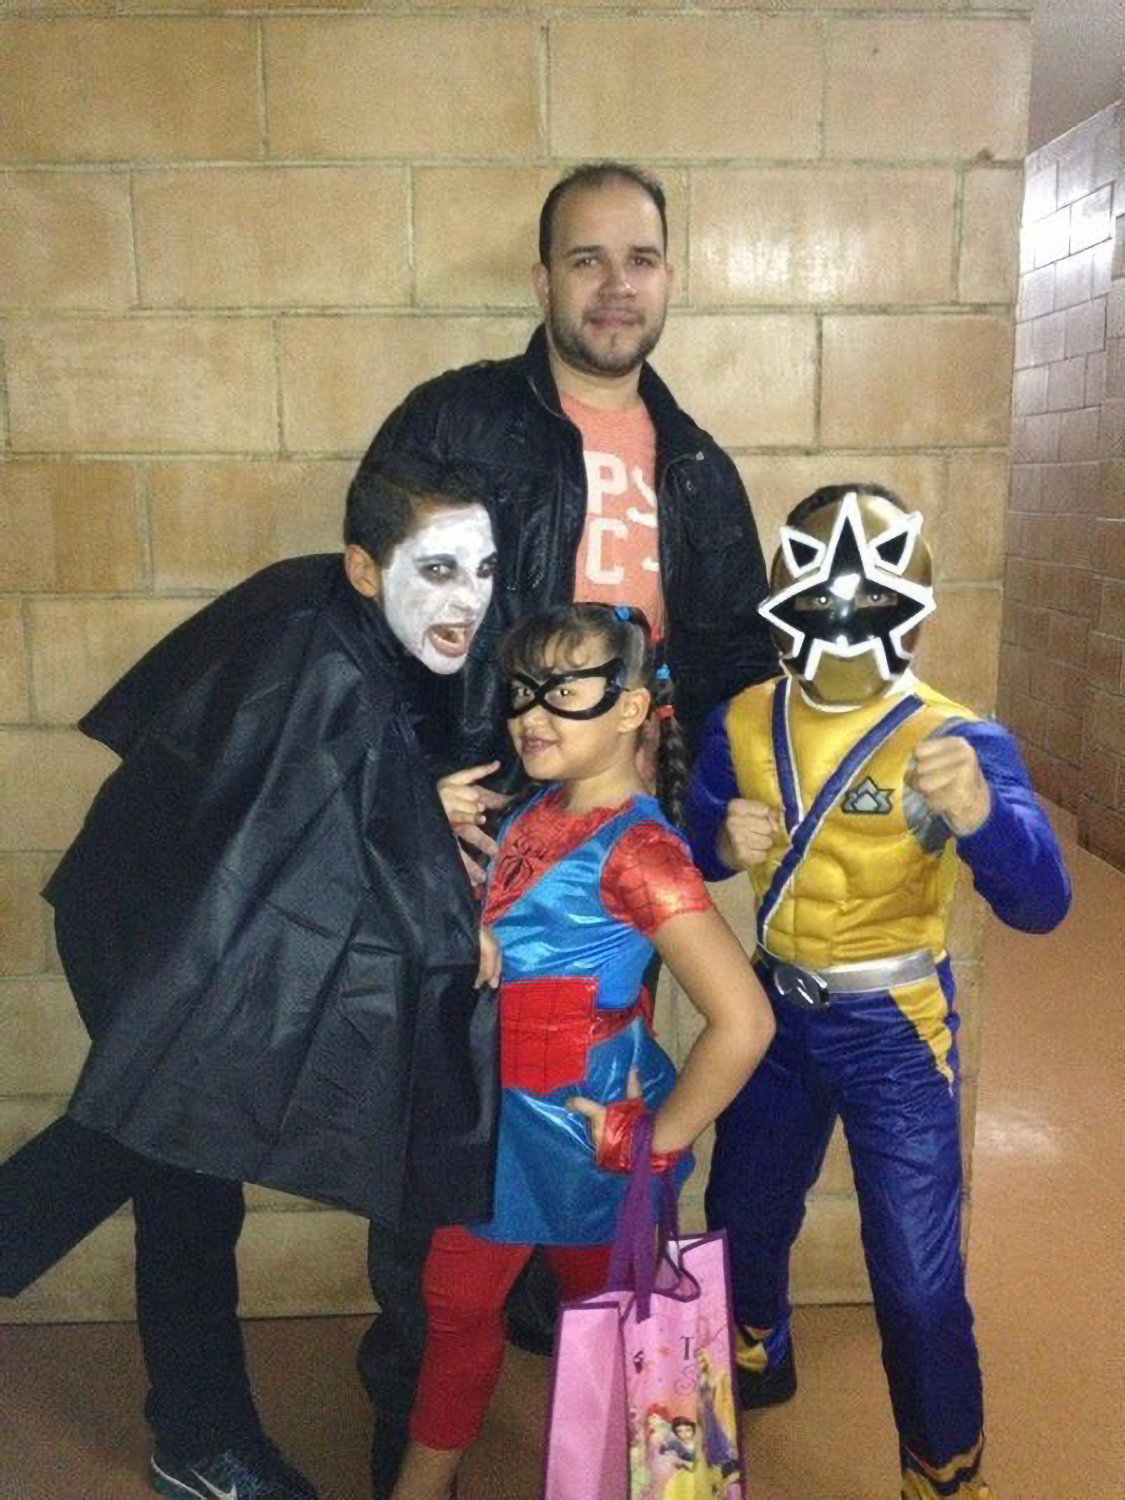 A much younger Angellyh Yambo on Halloween with her family. She would regularly visit her dad's workplace for trick or treating. Manuel Yambo is a night doorman at The Glen Briar co-op in Riverdale.